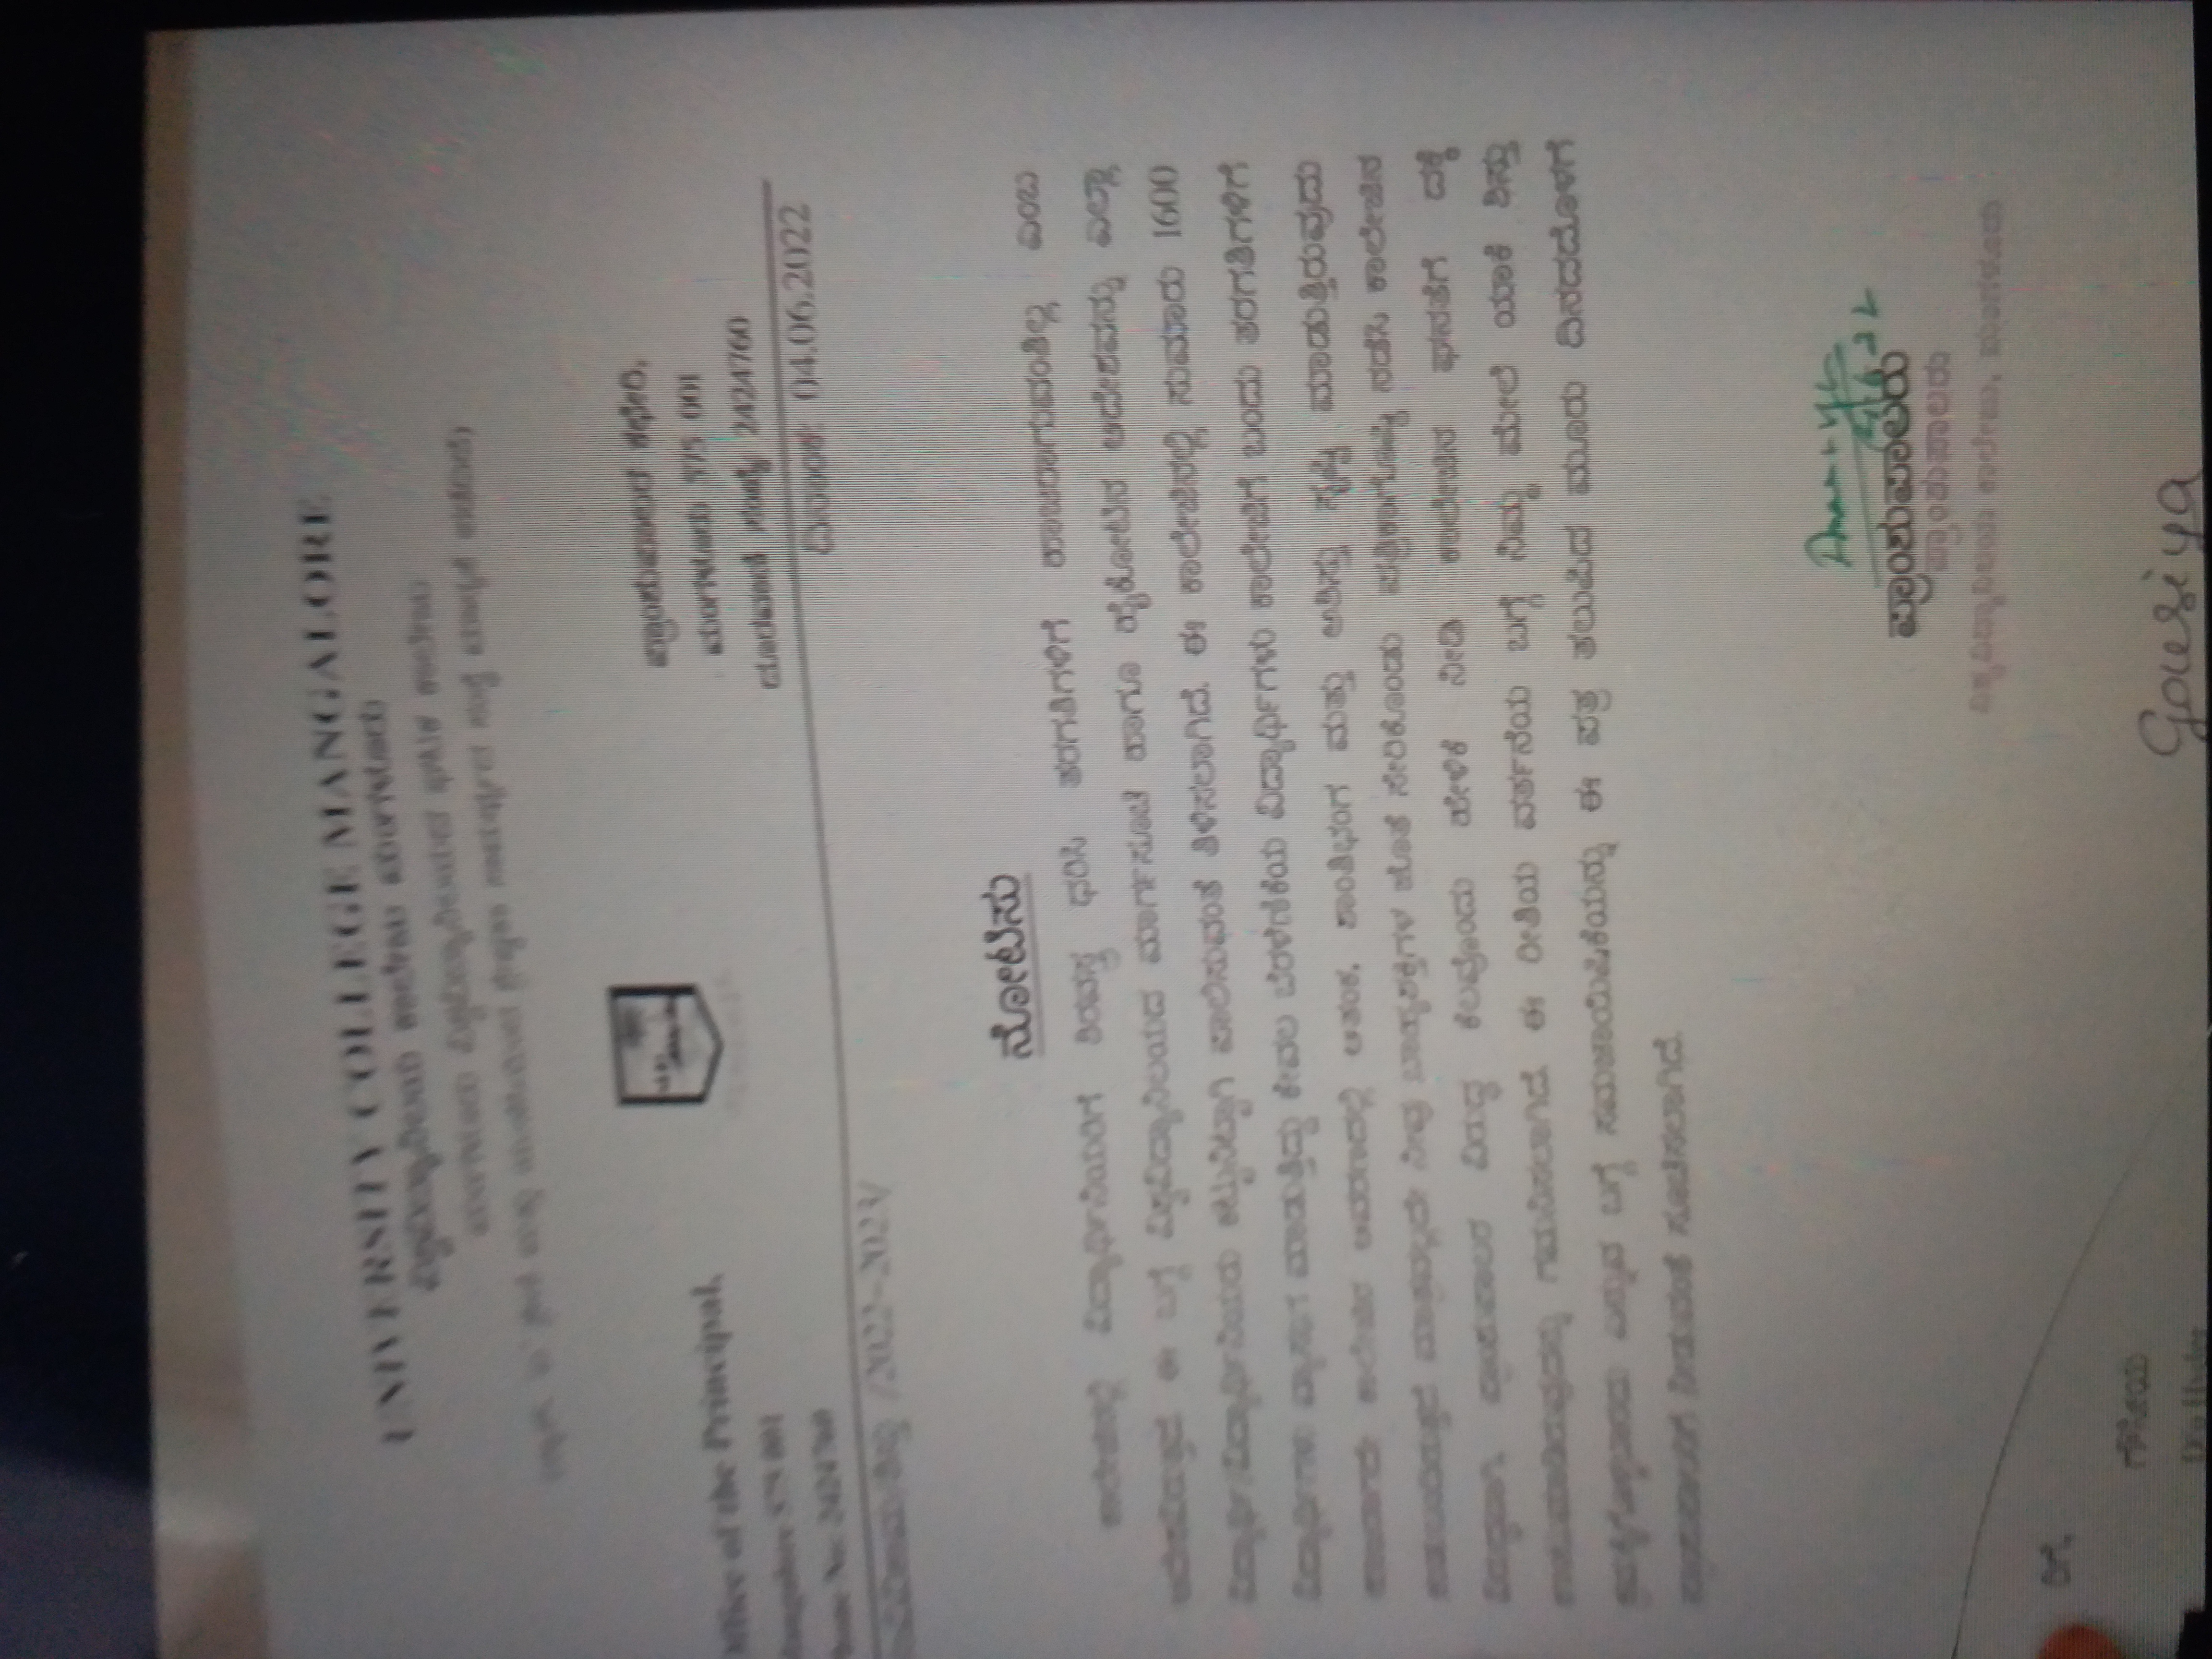 manglore-university-college-hijab-row-notice-issued-to-the-students